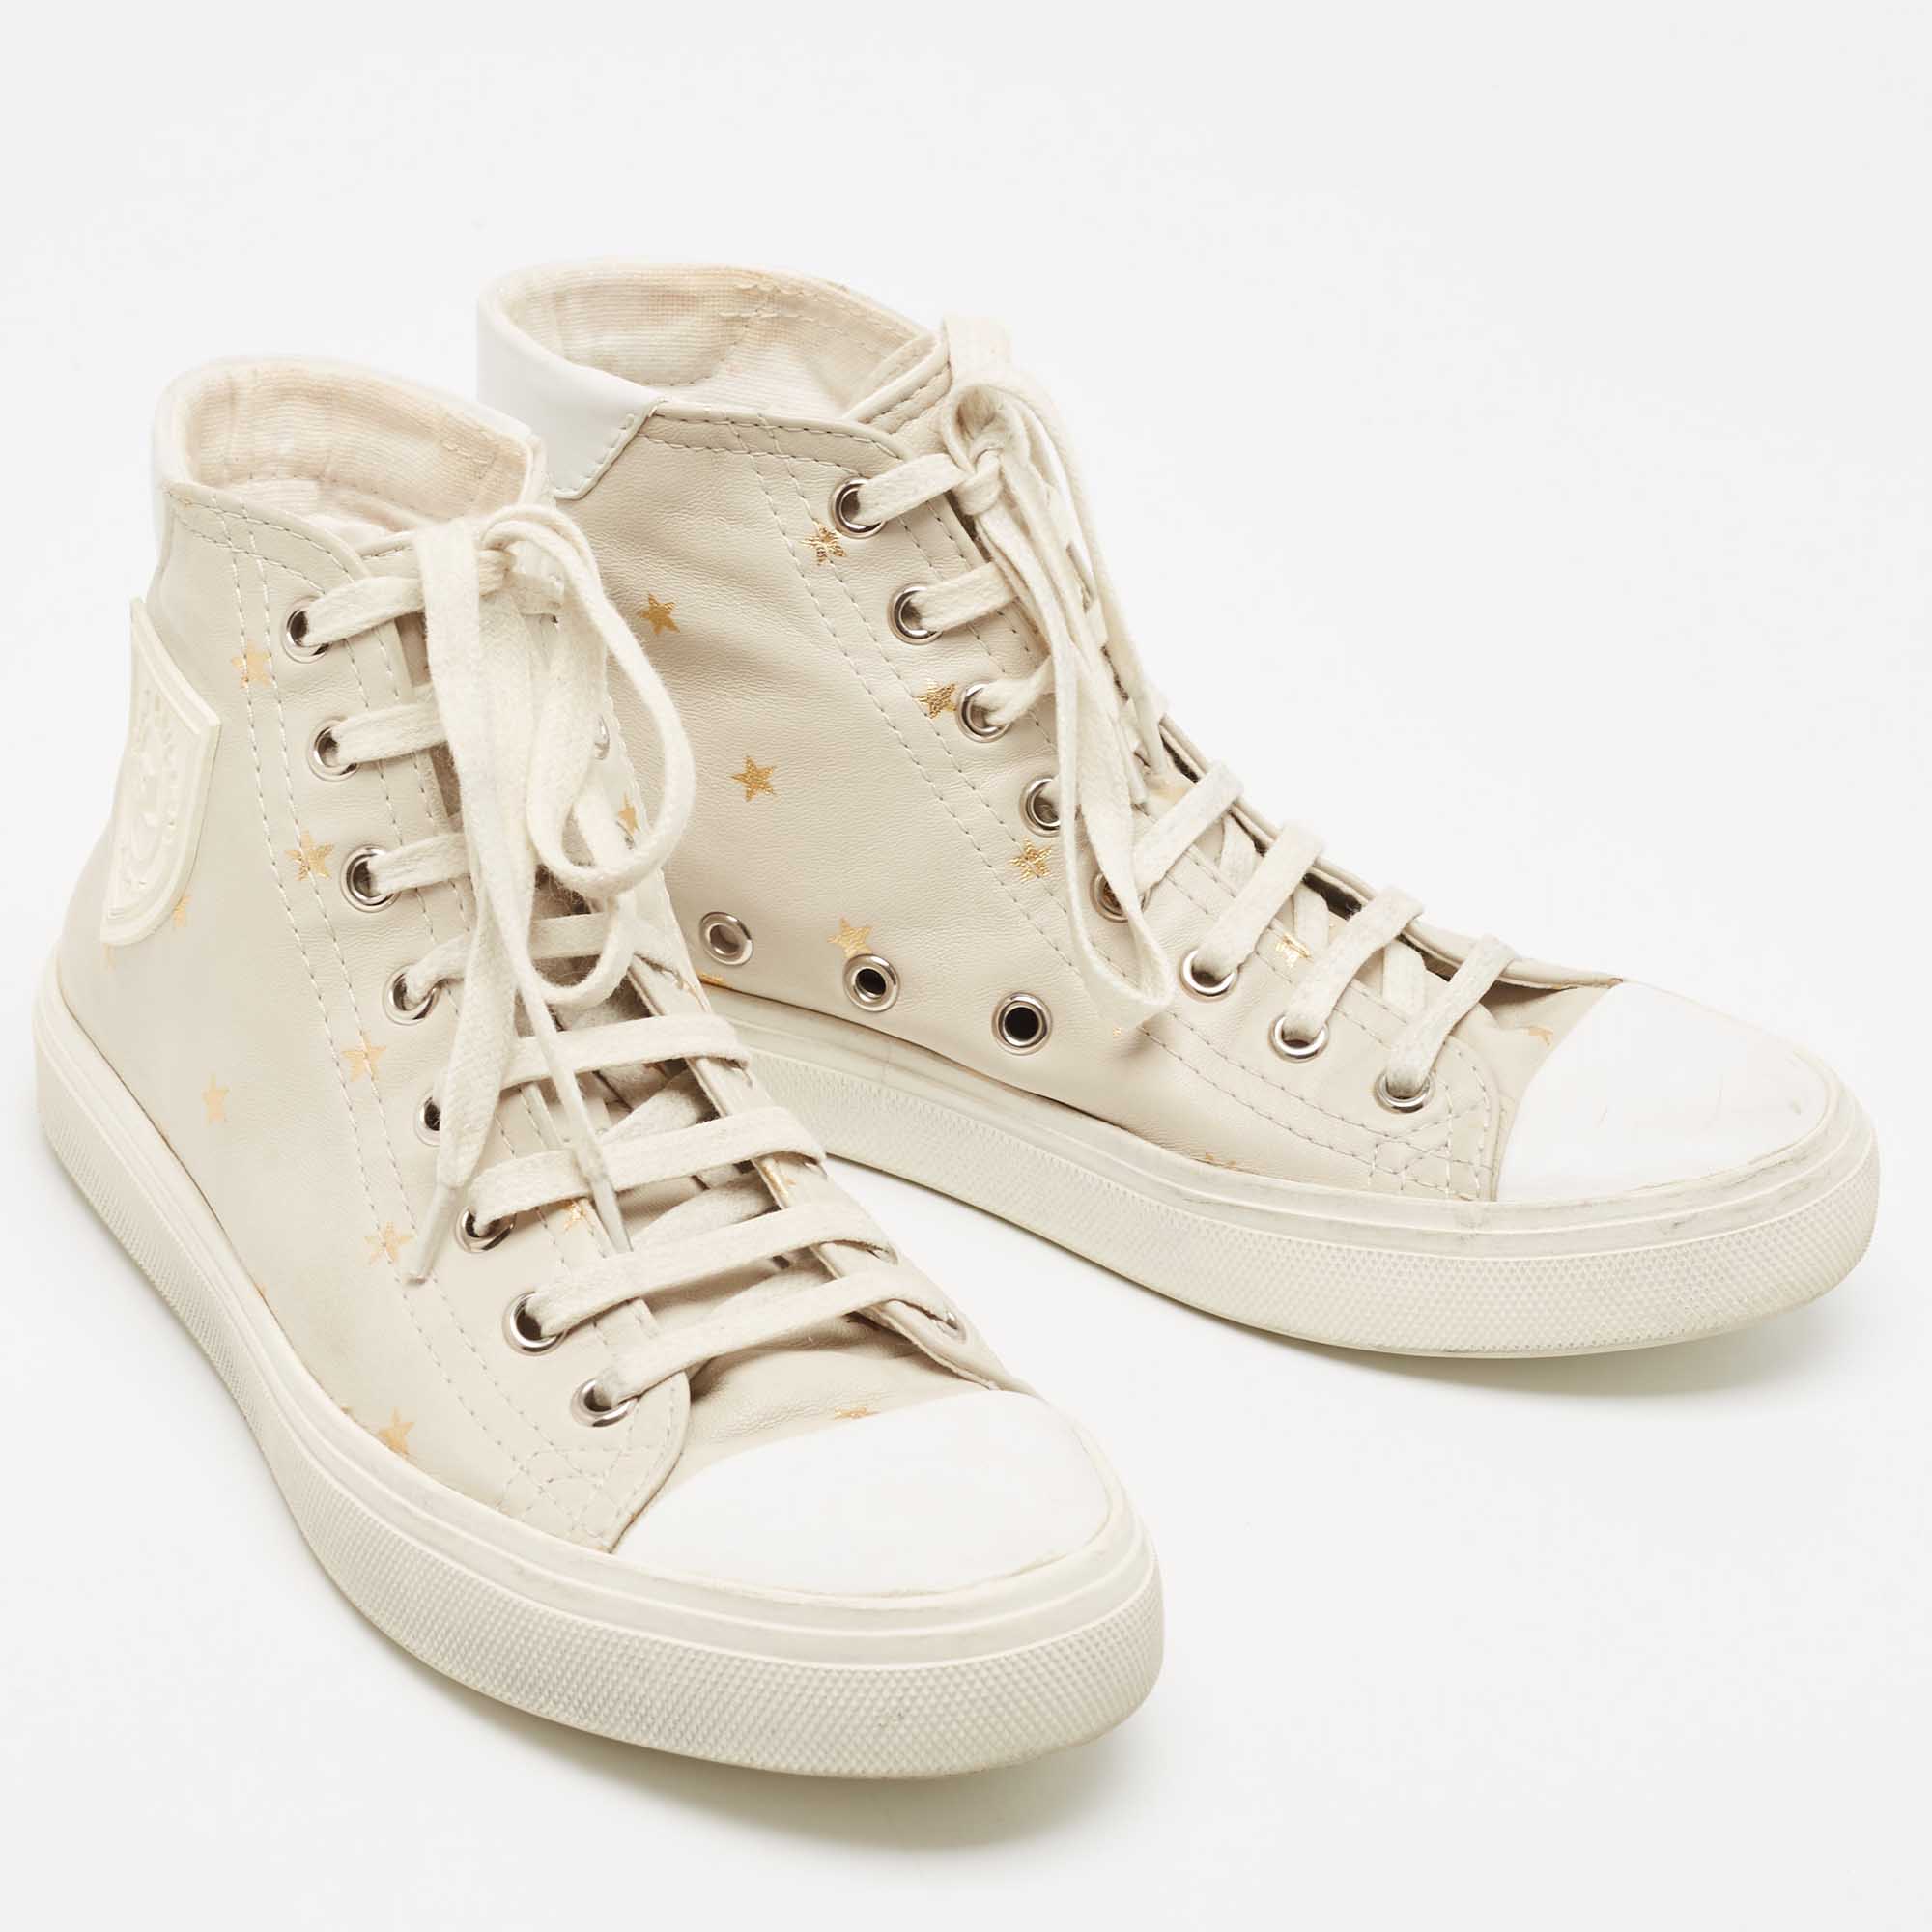 Saint Laurent Grey/White Leather Bedford Star Print High Top Sneakers Size  36